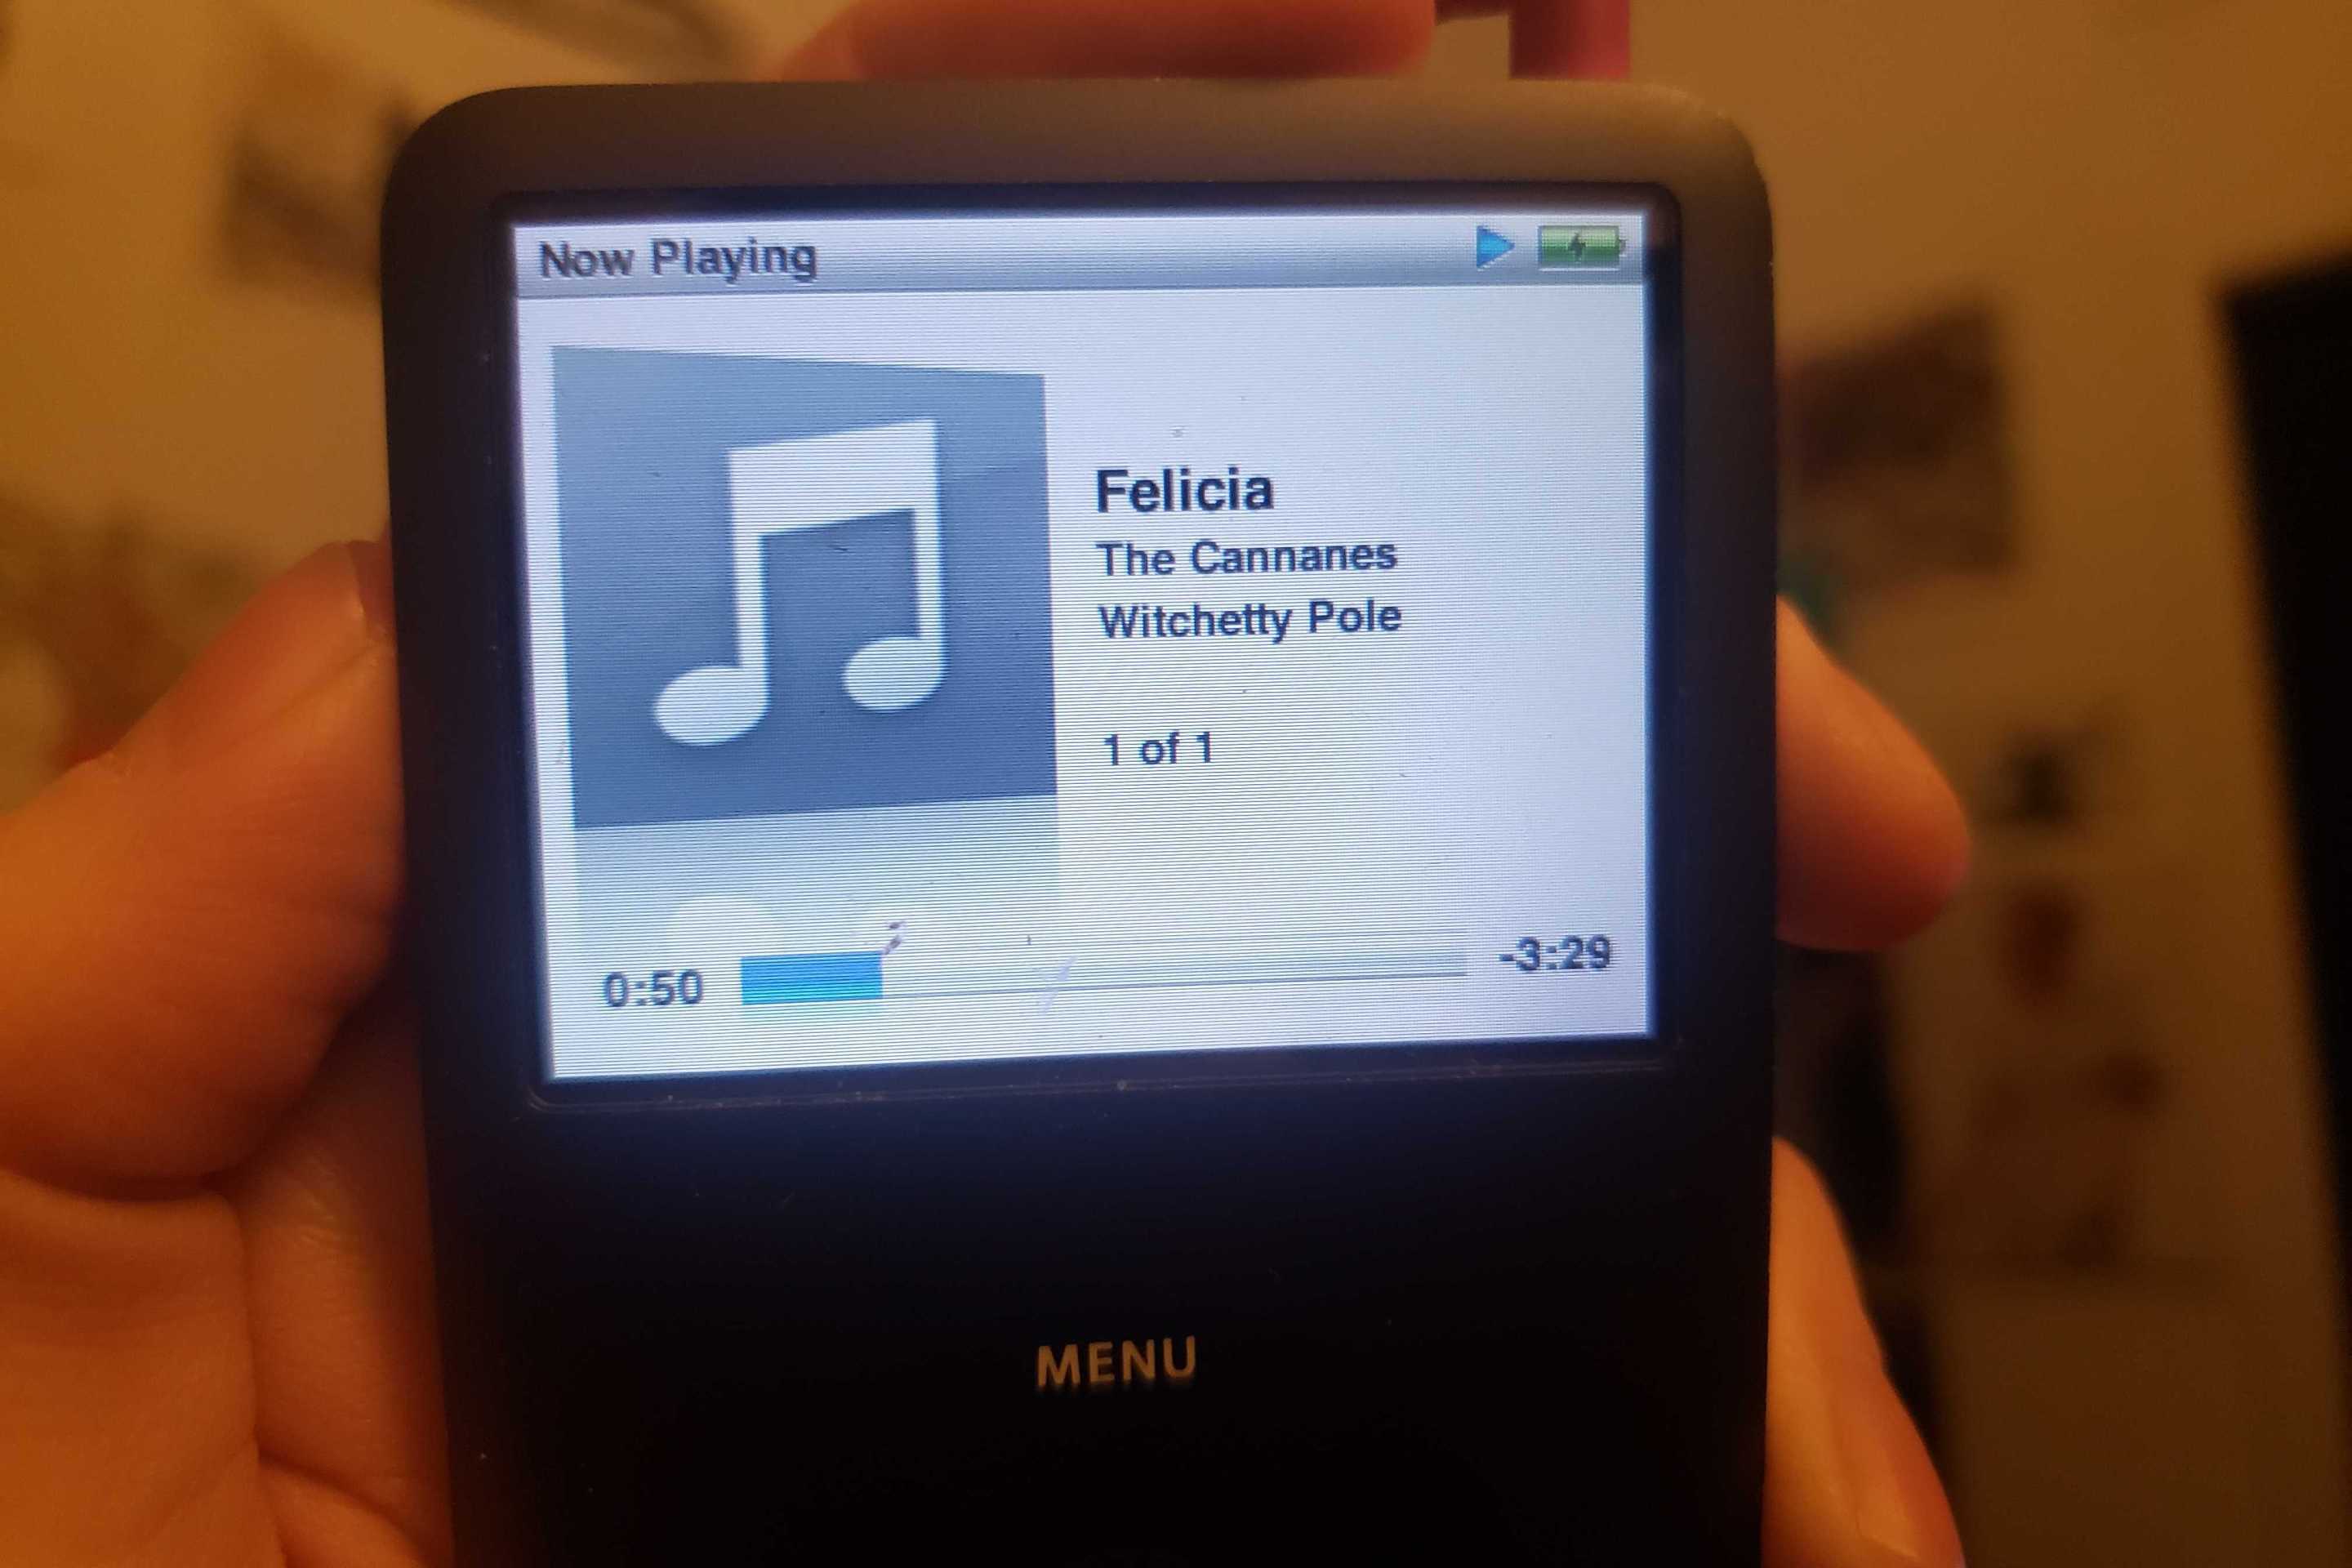 "Felicia" by The Cannanes on an old iPod